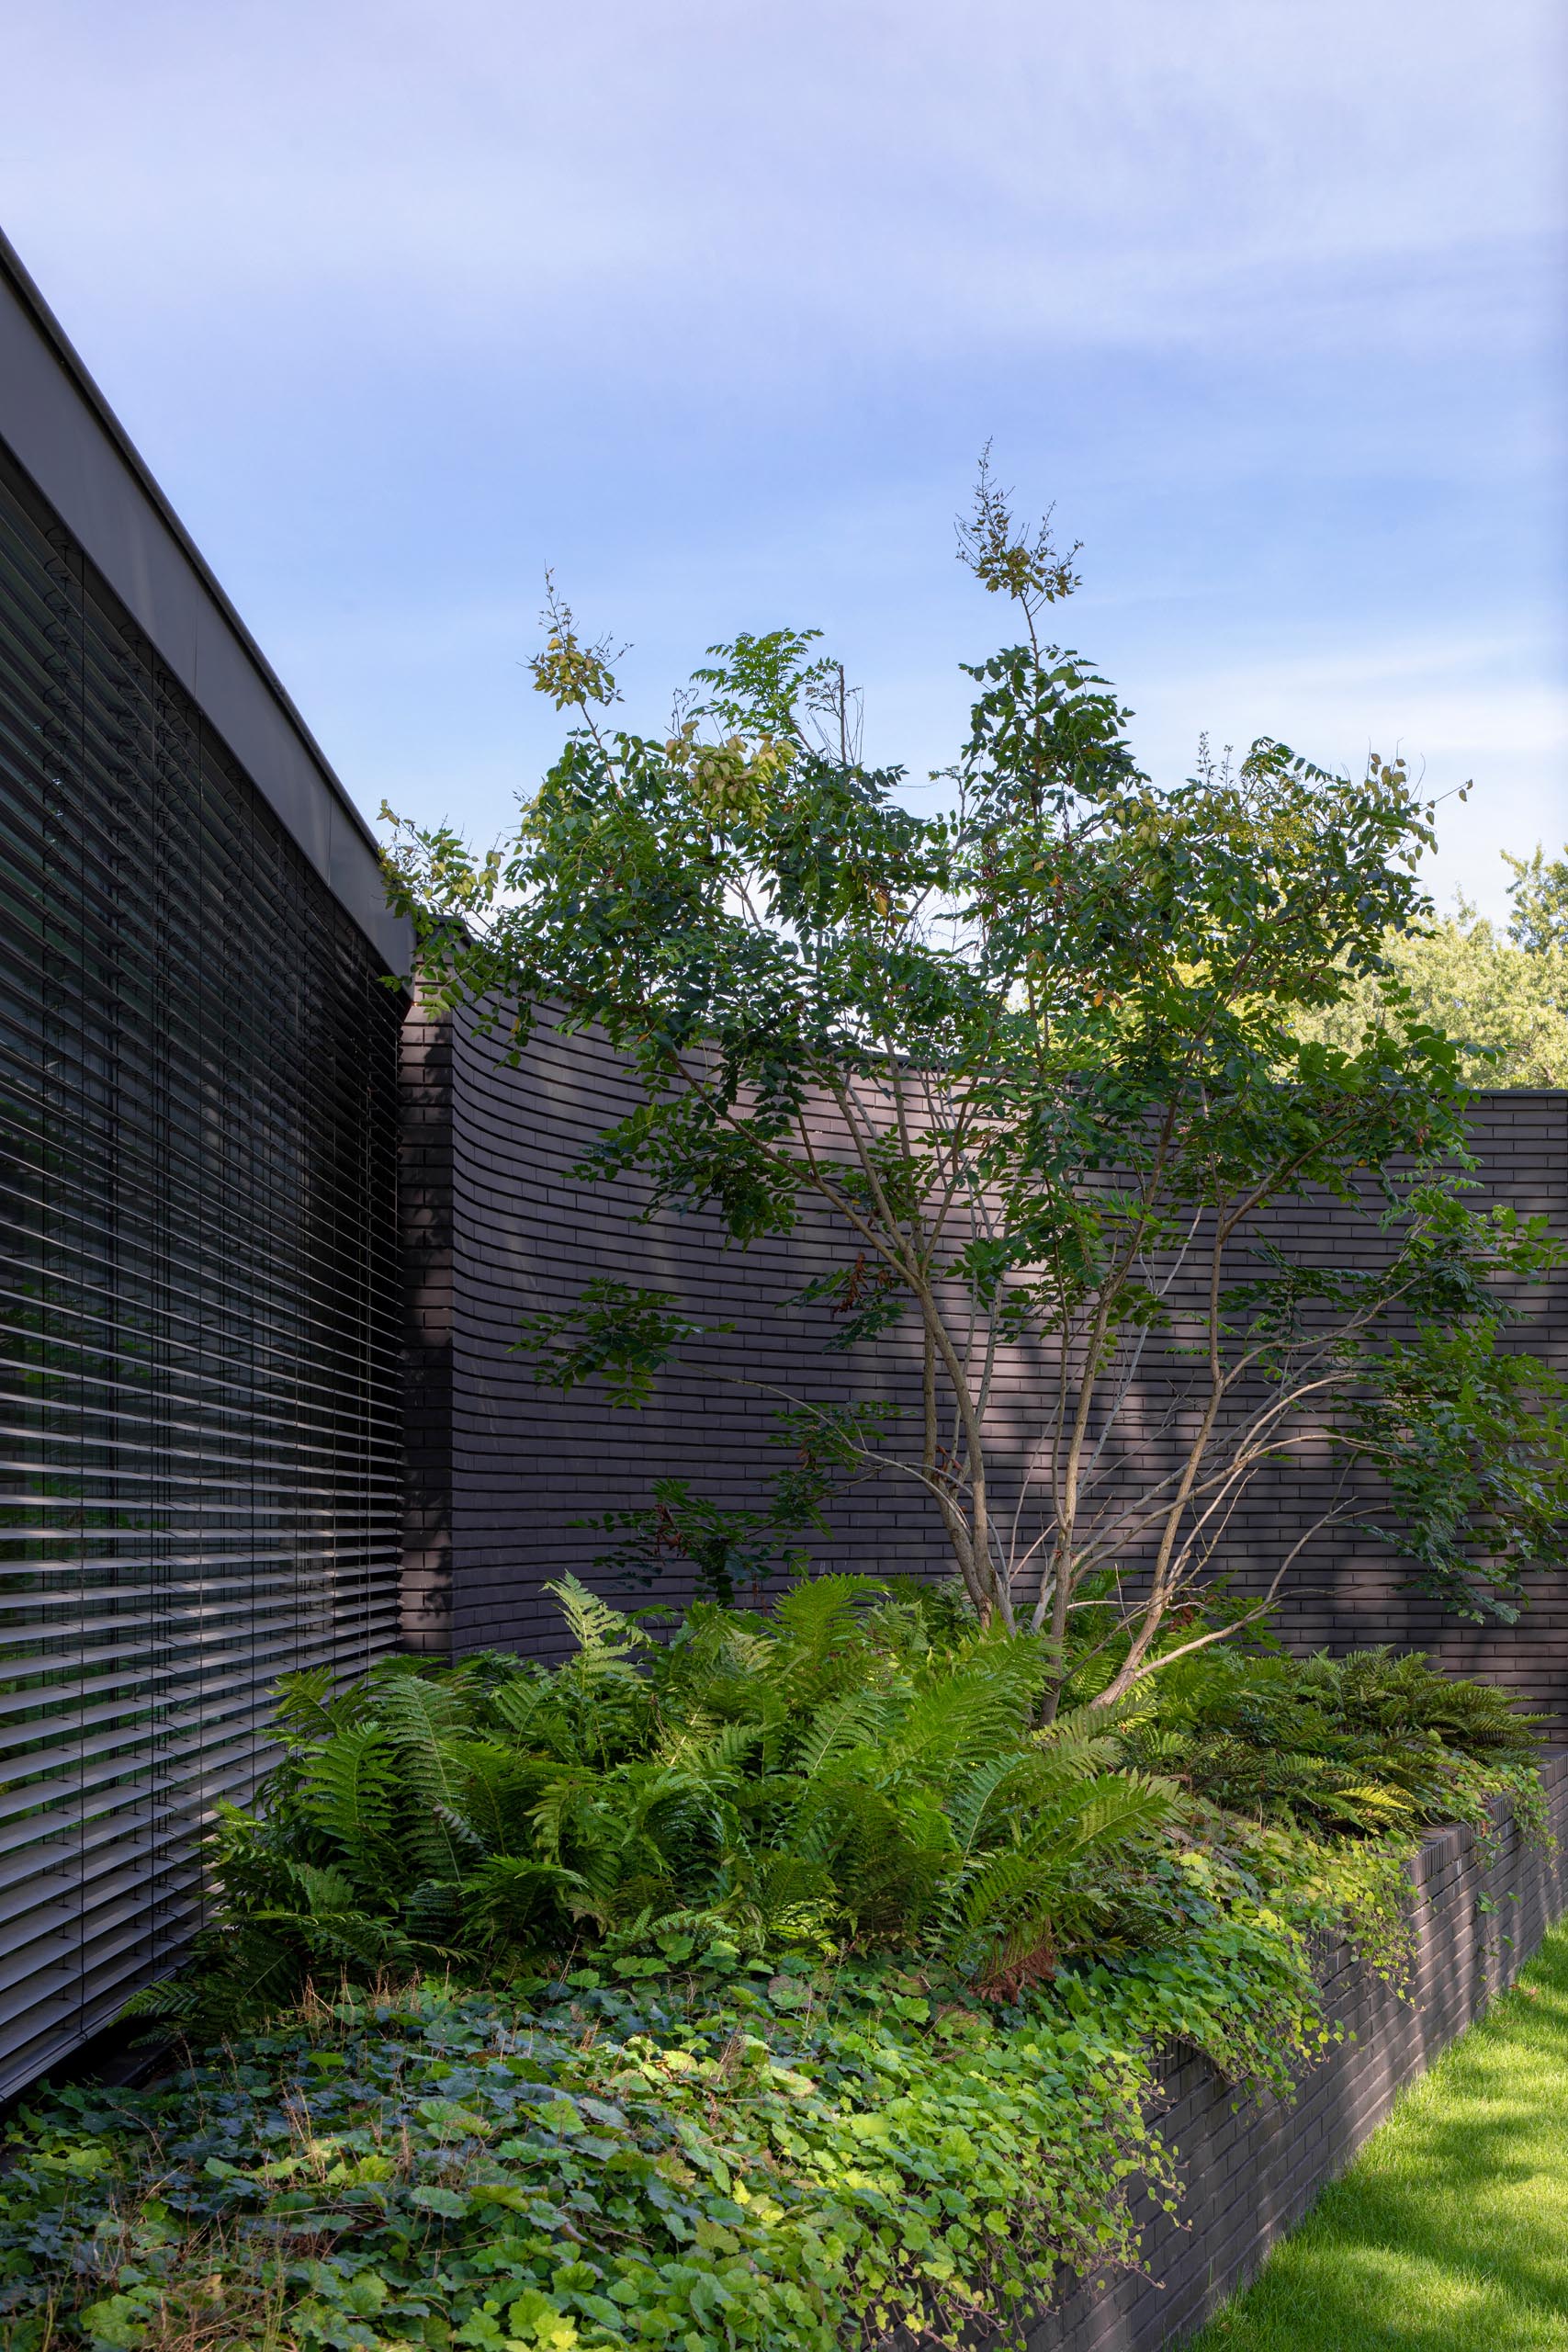 The black brick facade of this modern home features curves and has large integrated planters that highlight the lush greenery.